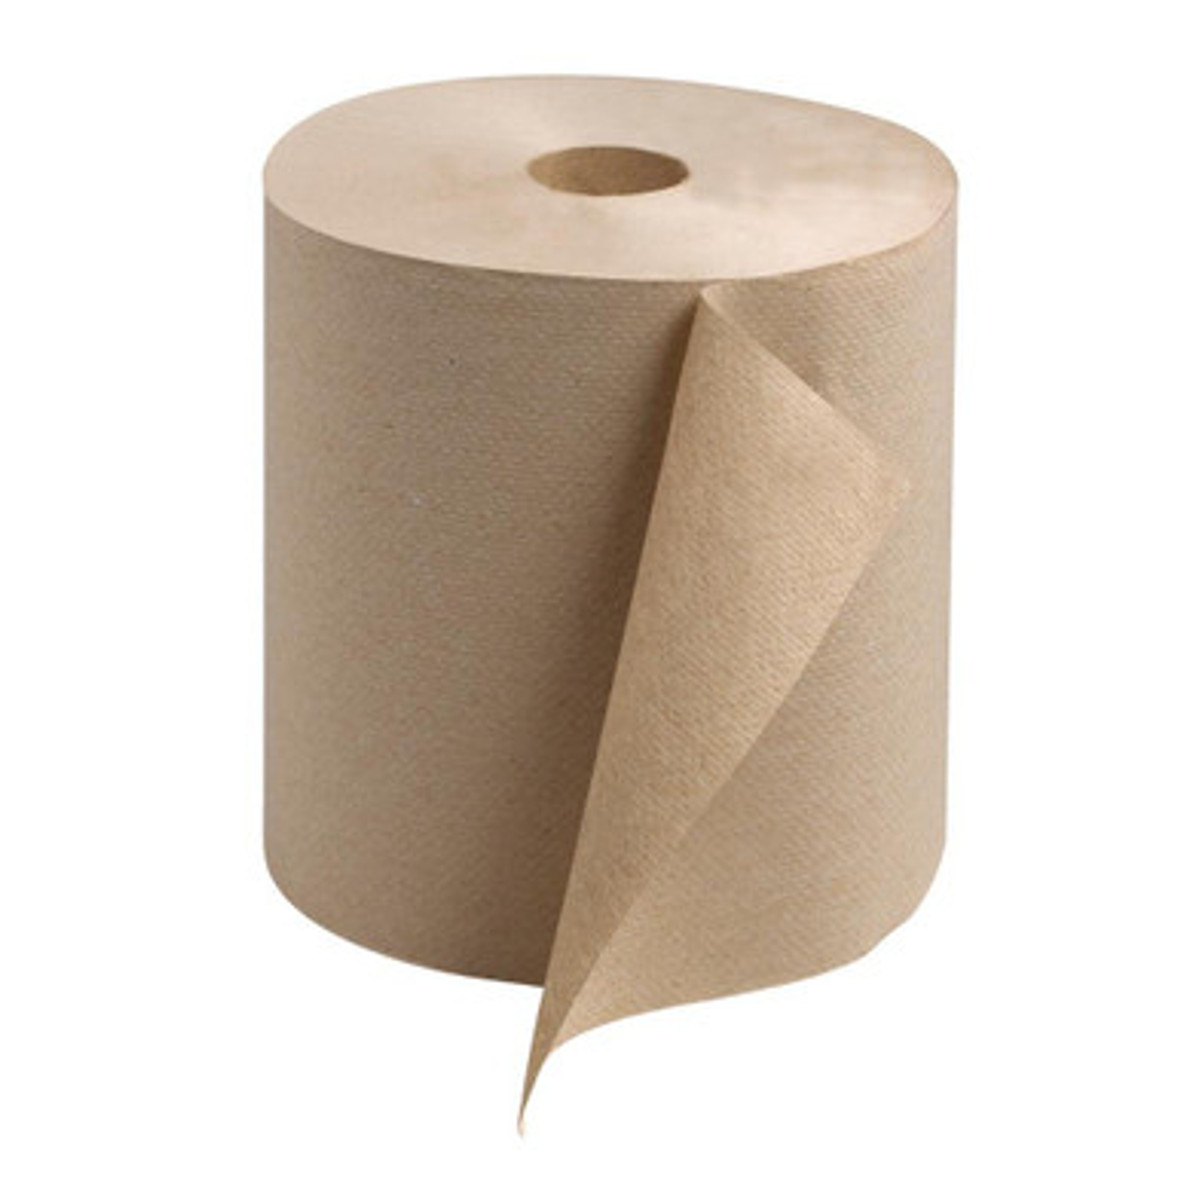 Renown REN06180-WB Controlled Use Roll Towel (Y), Natural, 8" x 1000', 1 Ply, 6 Per Case, Plastic, 8.75" x 23.19" x 15.5" (Pack of 6)